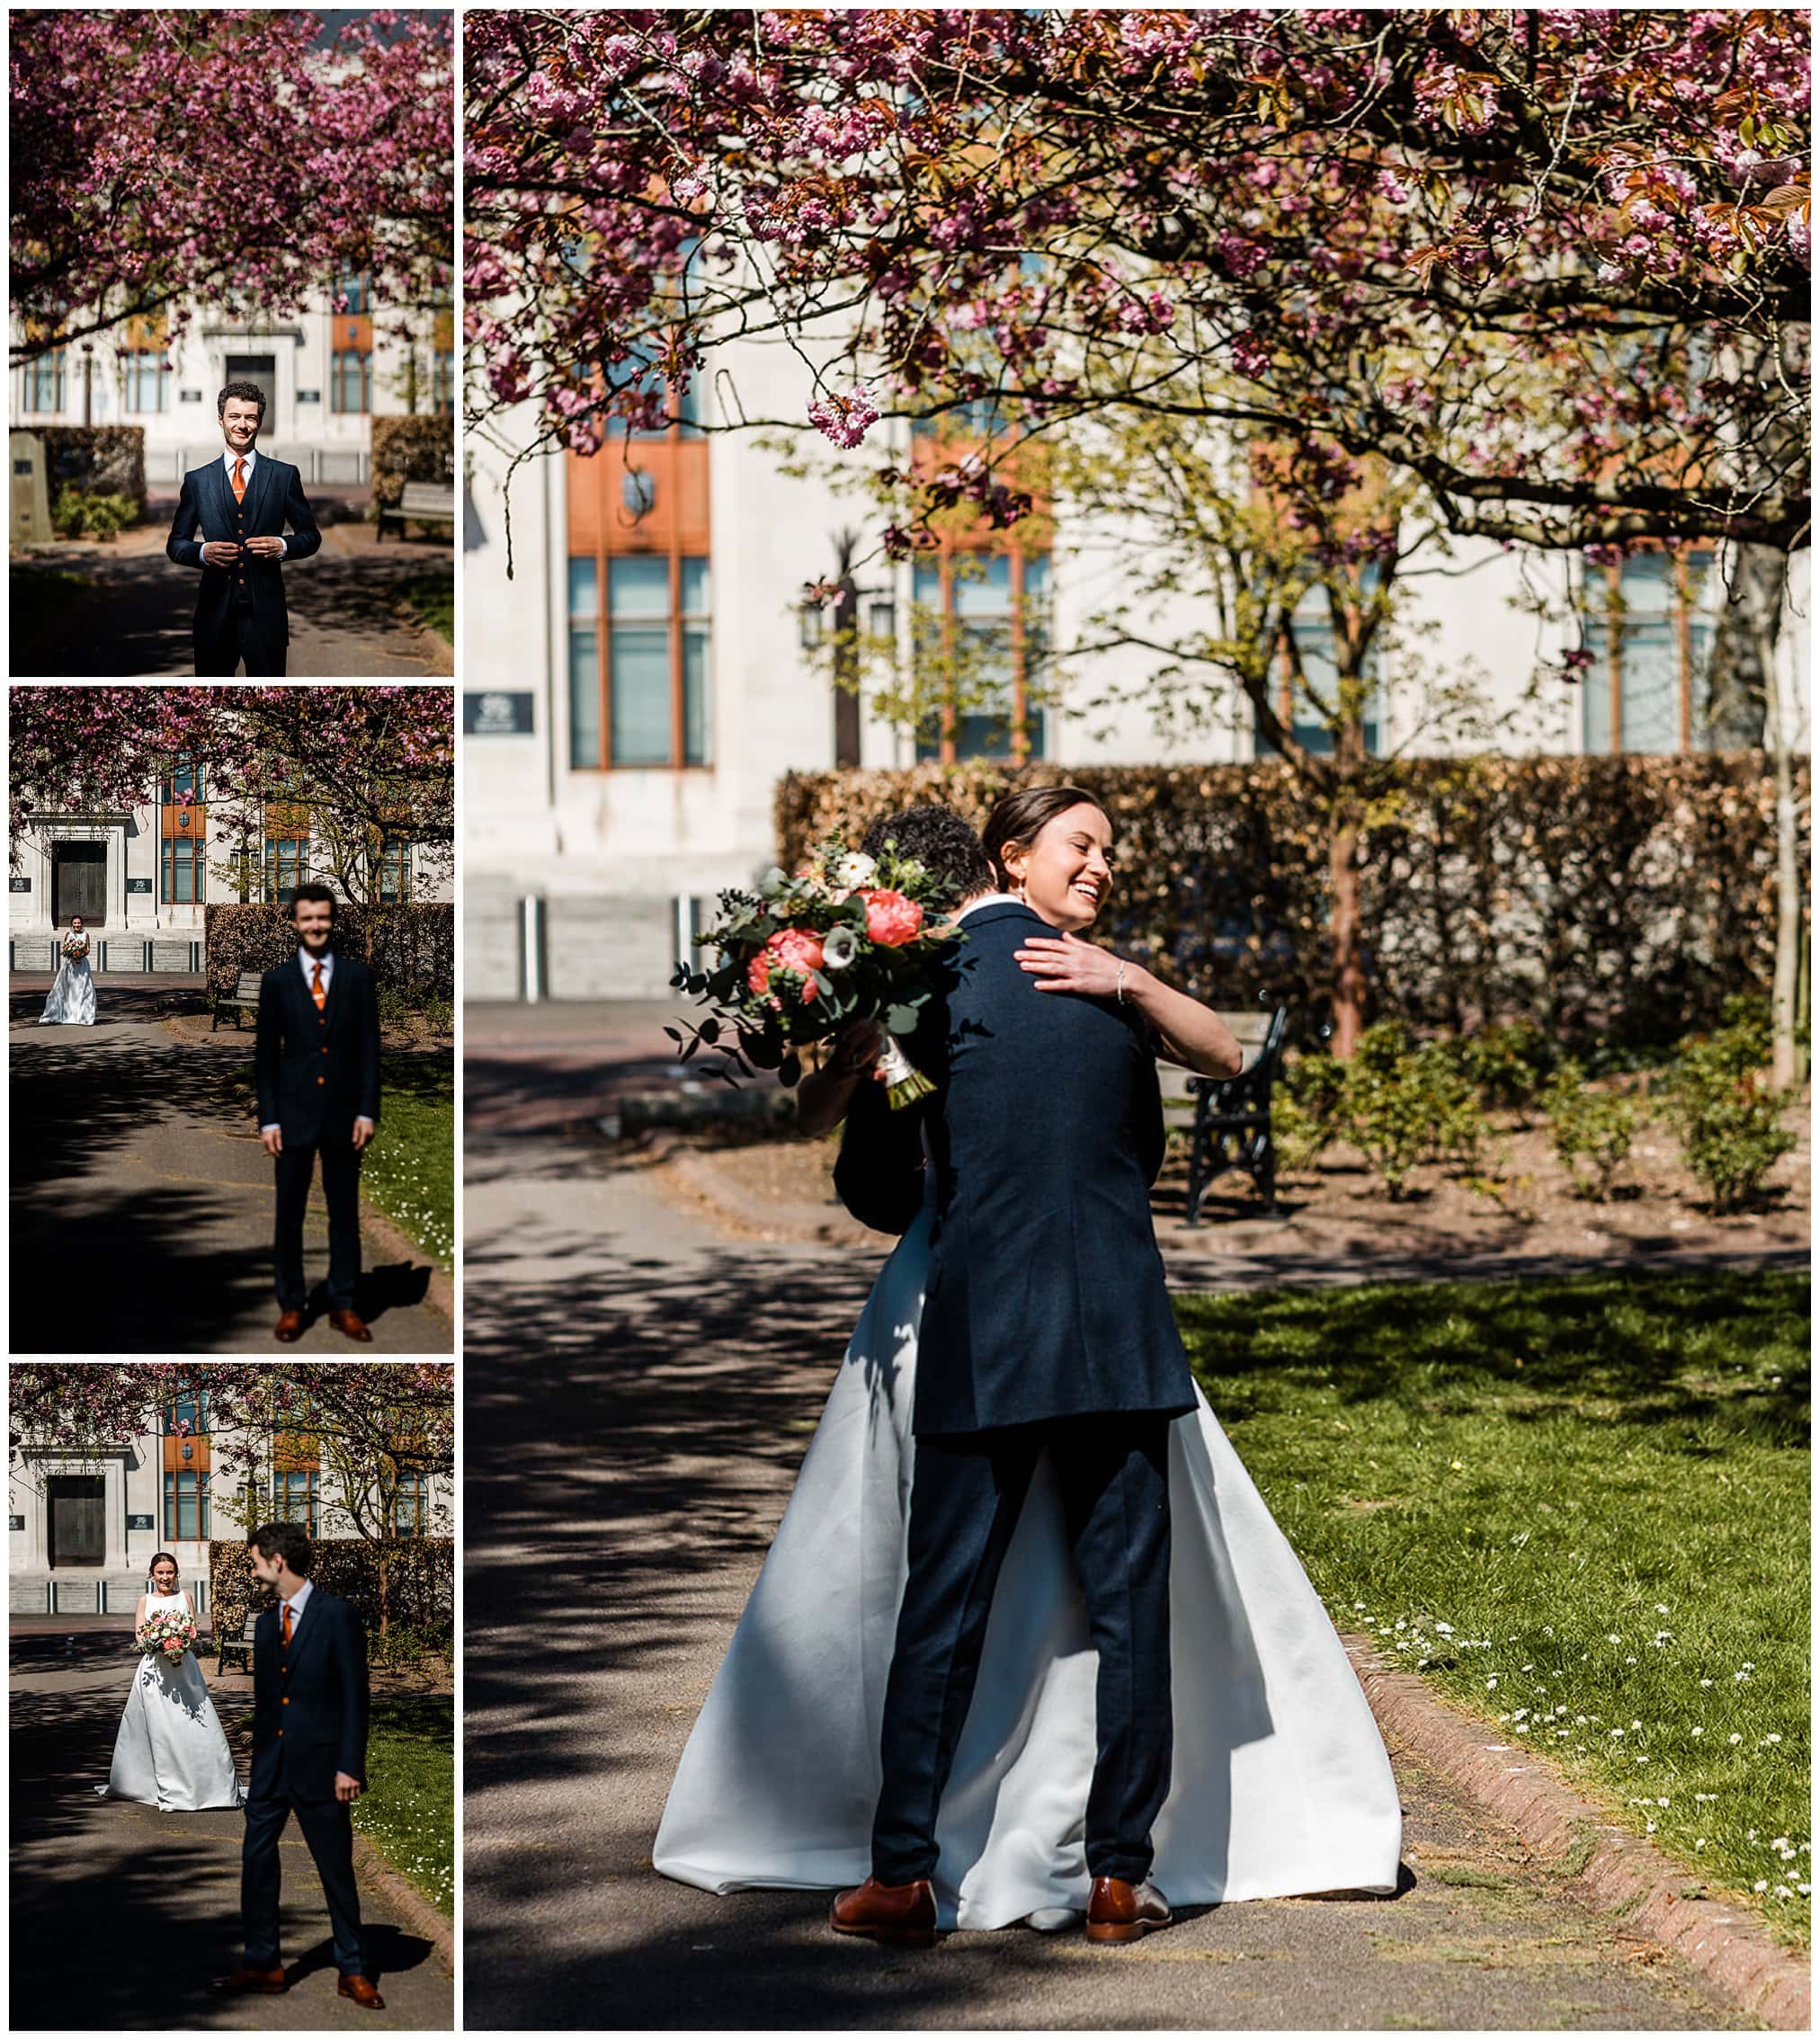 First look wedding photography in Alexandra gardens in Cardiff.